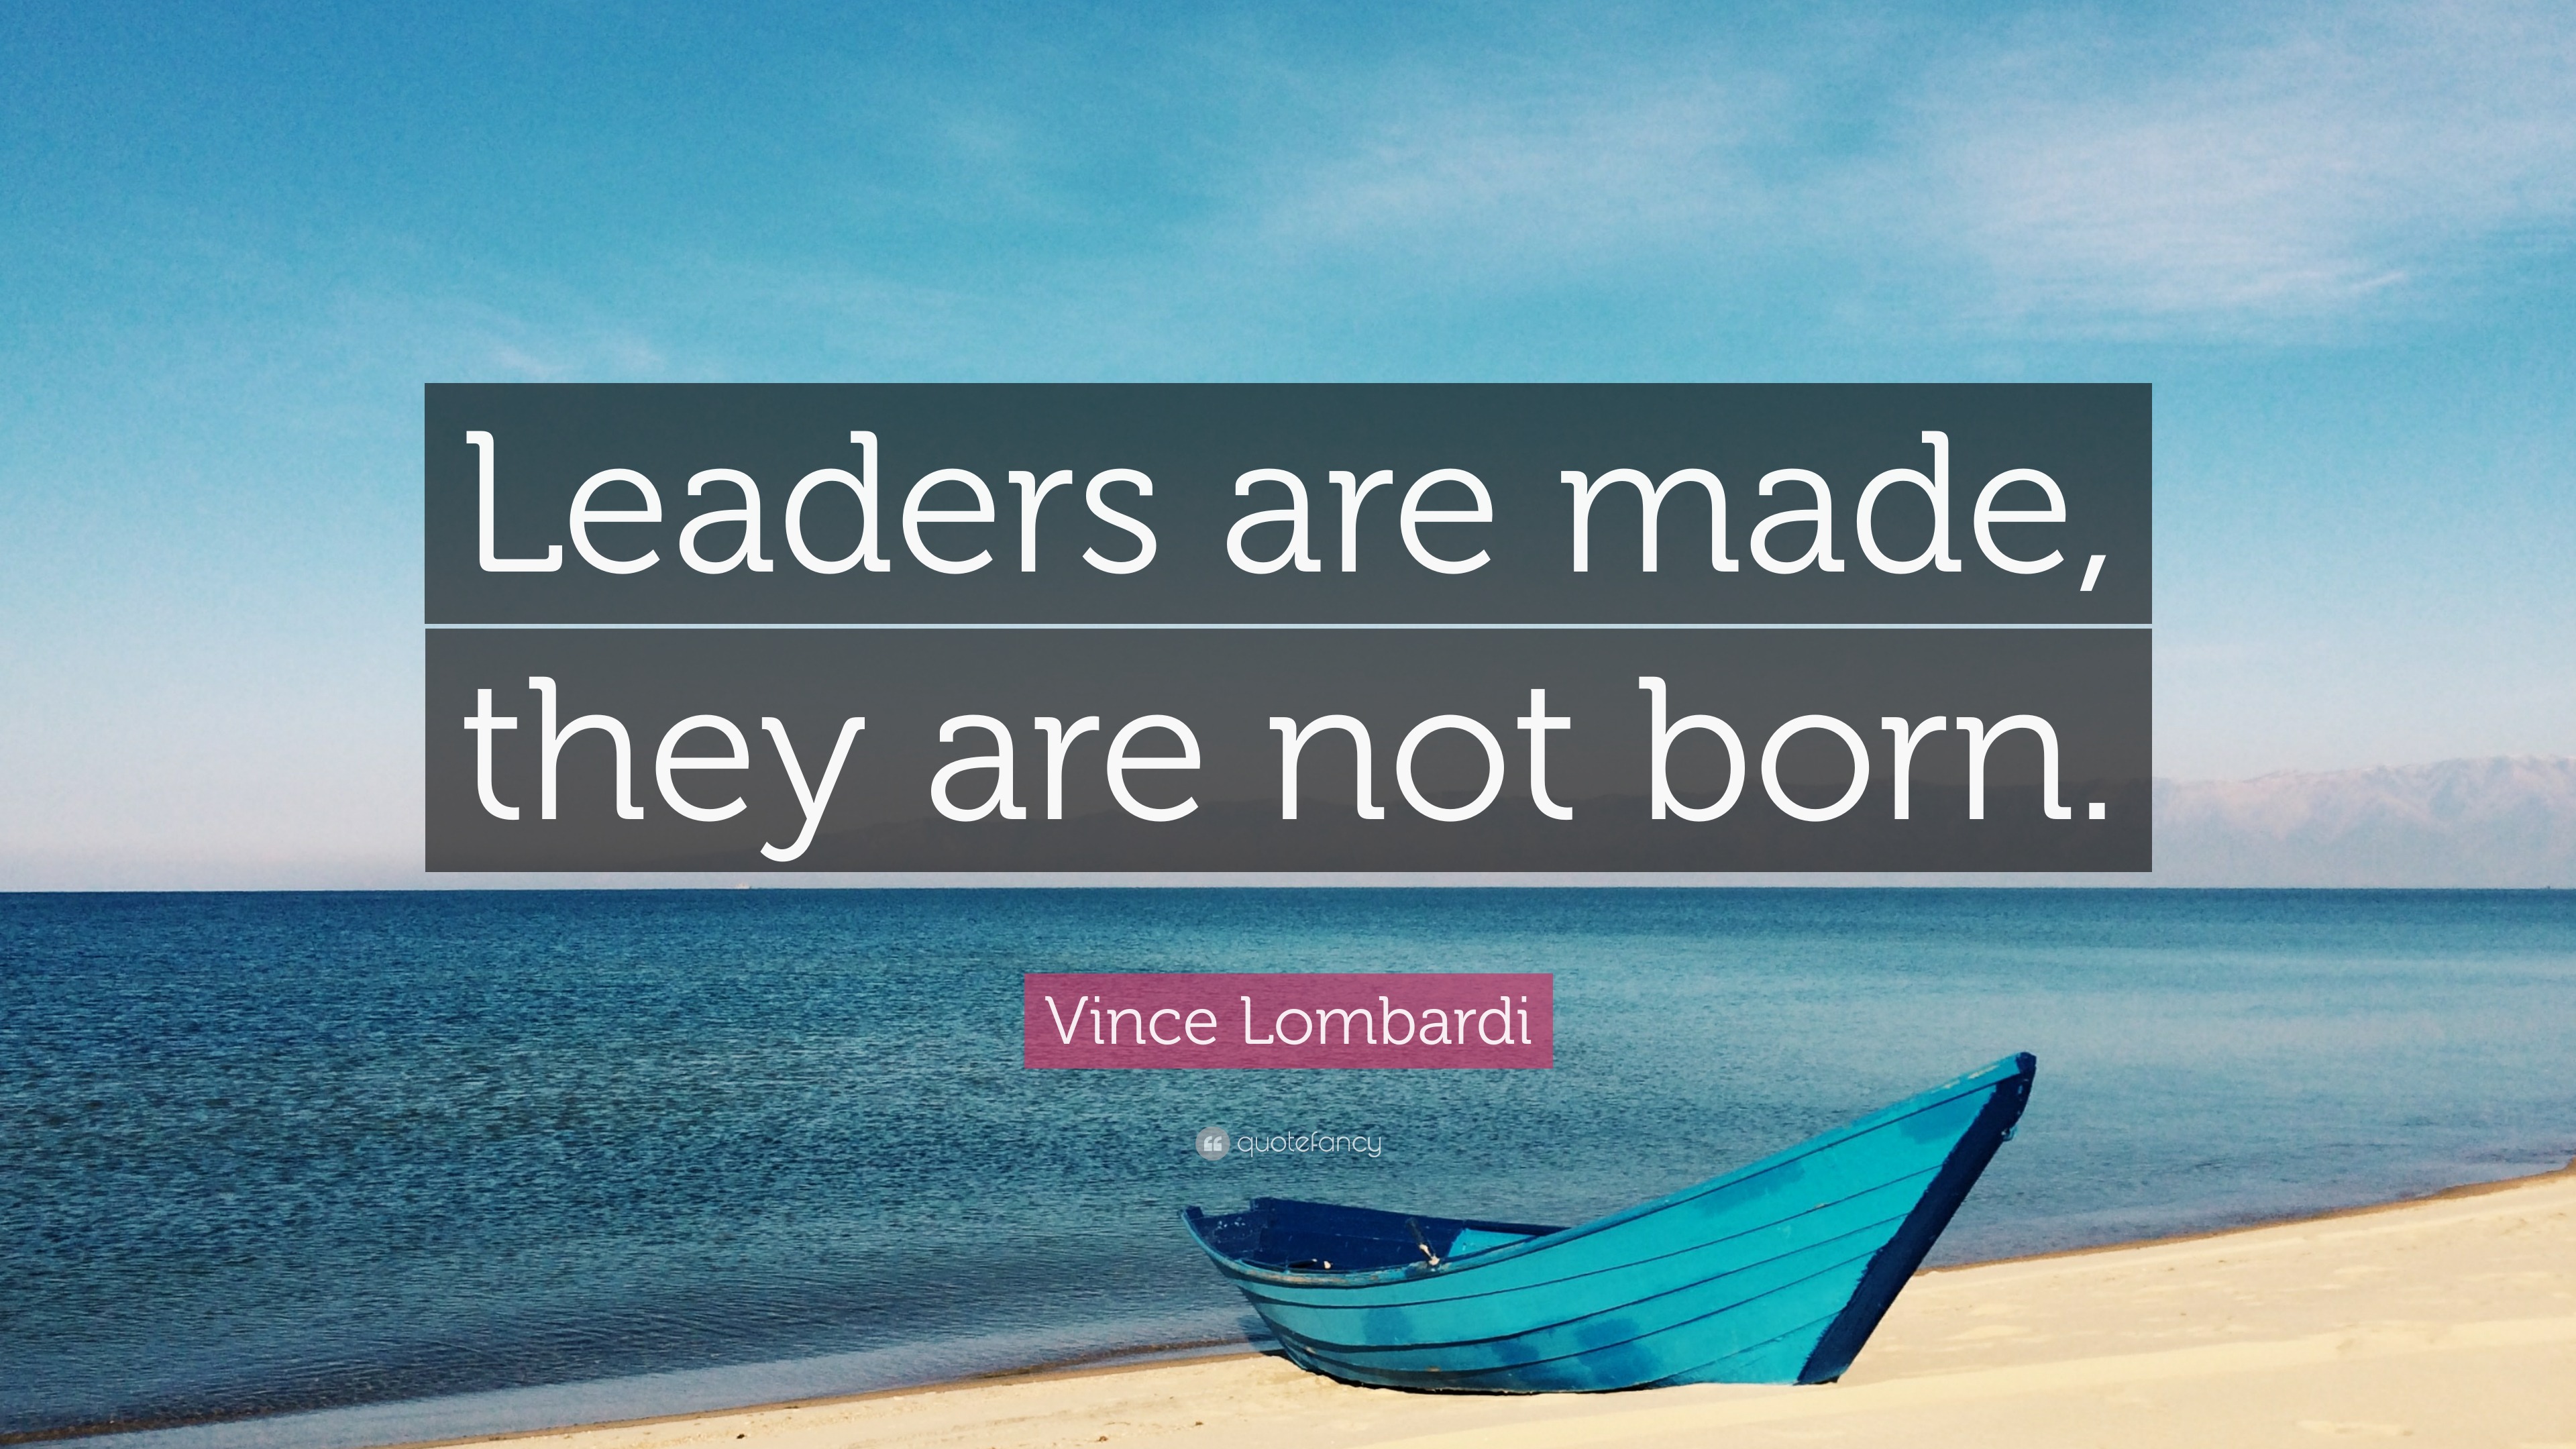 Vince Lombardi Quote: “Leaders are made, they are not born.”